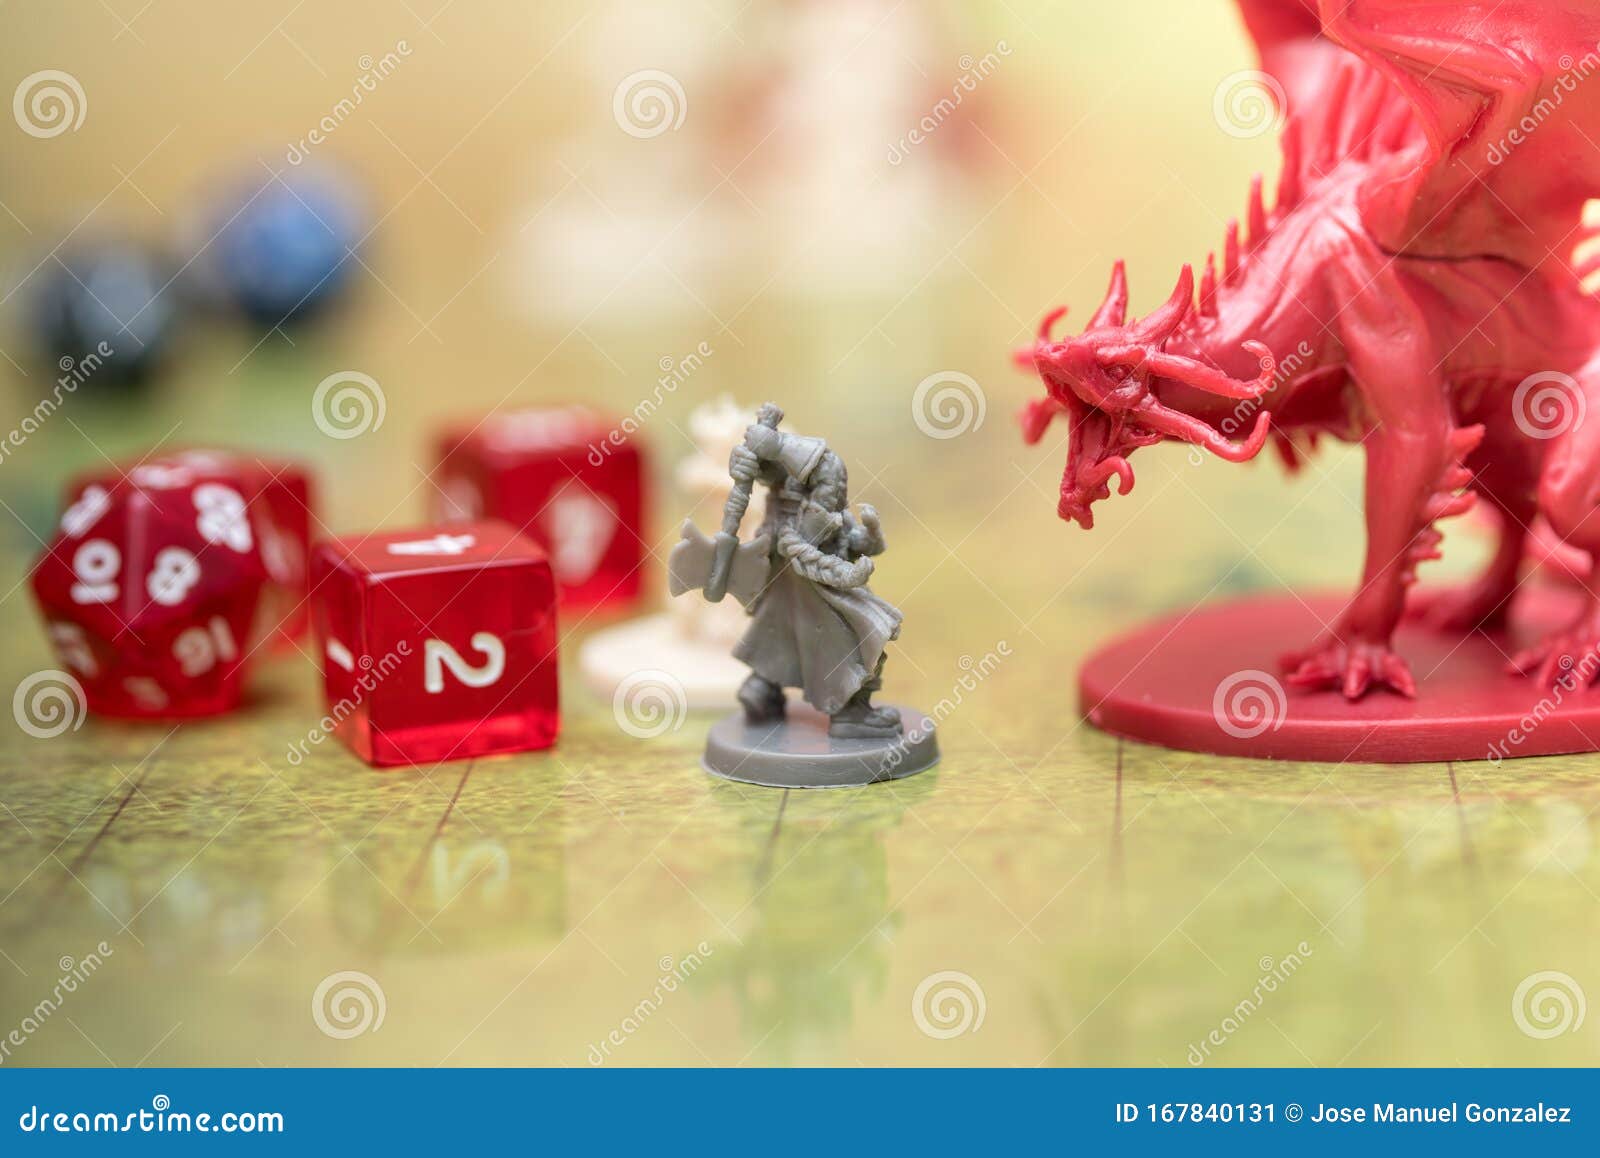 detail of two miniatures on the battlefield of the role-playing game of dungeons and dragons